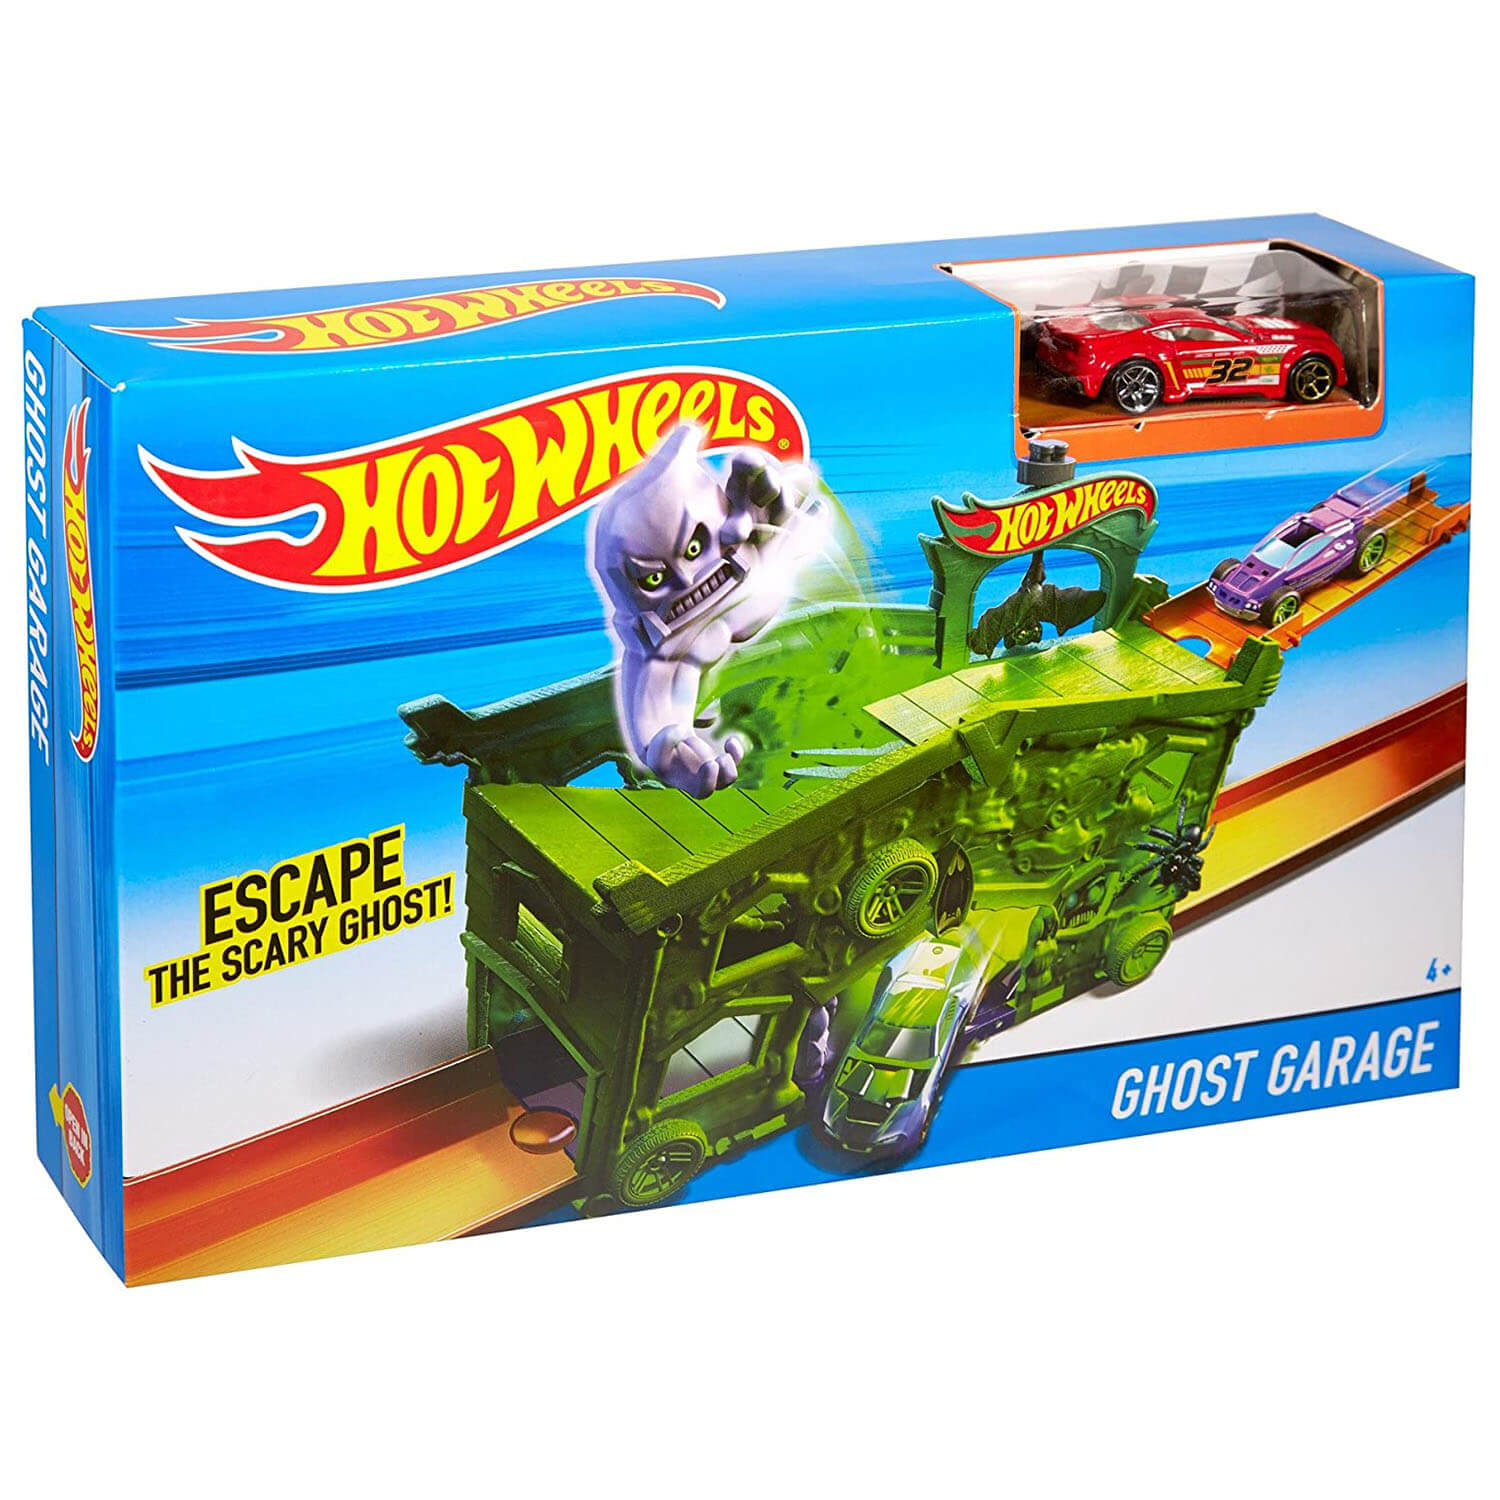 Front view of the Hot Wheels Ghost Garage Playset package.